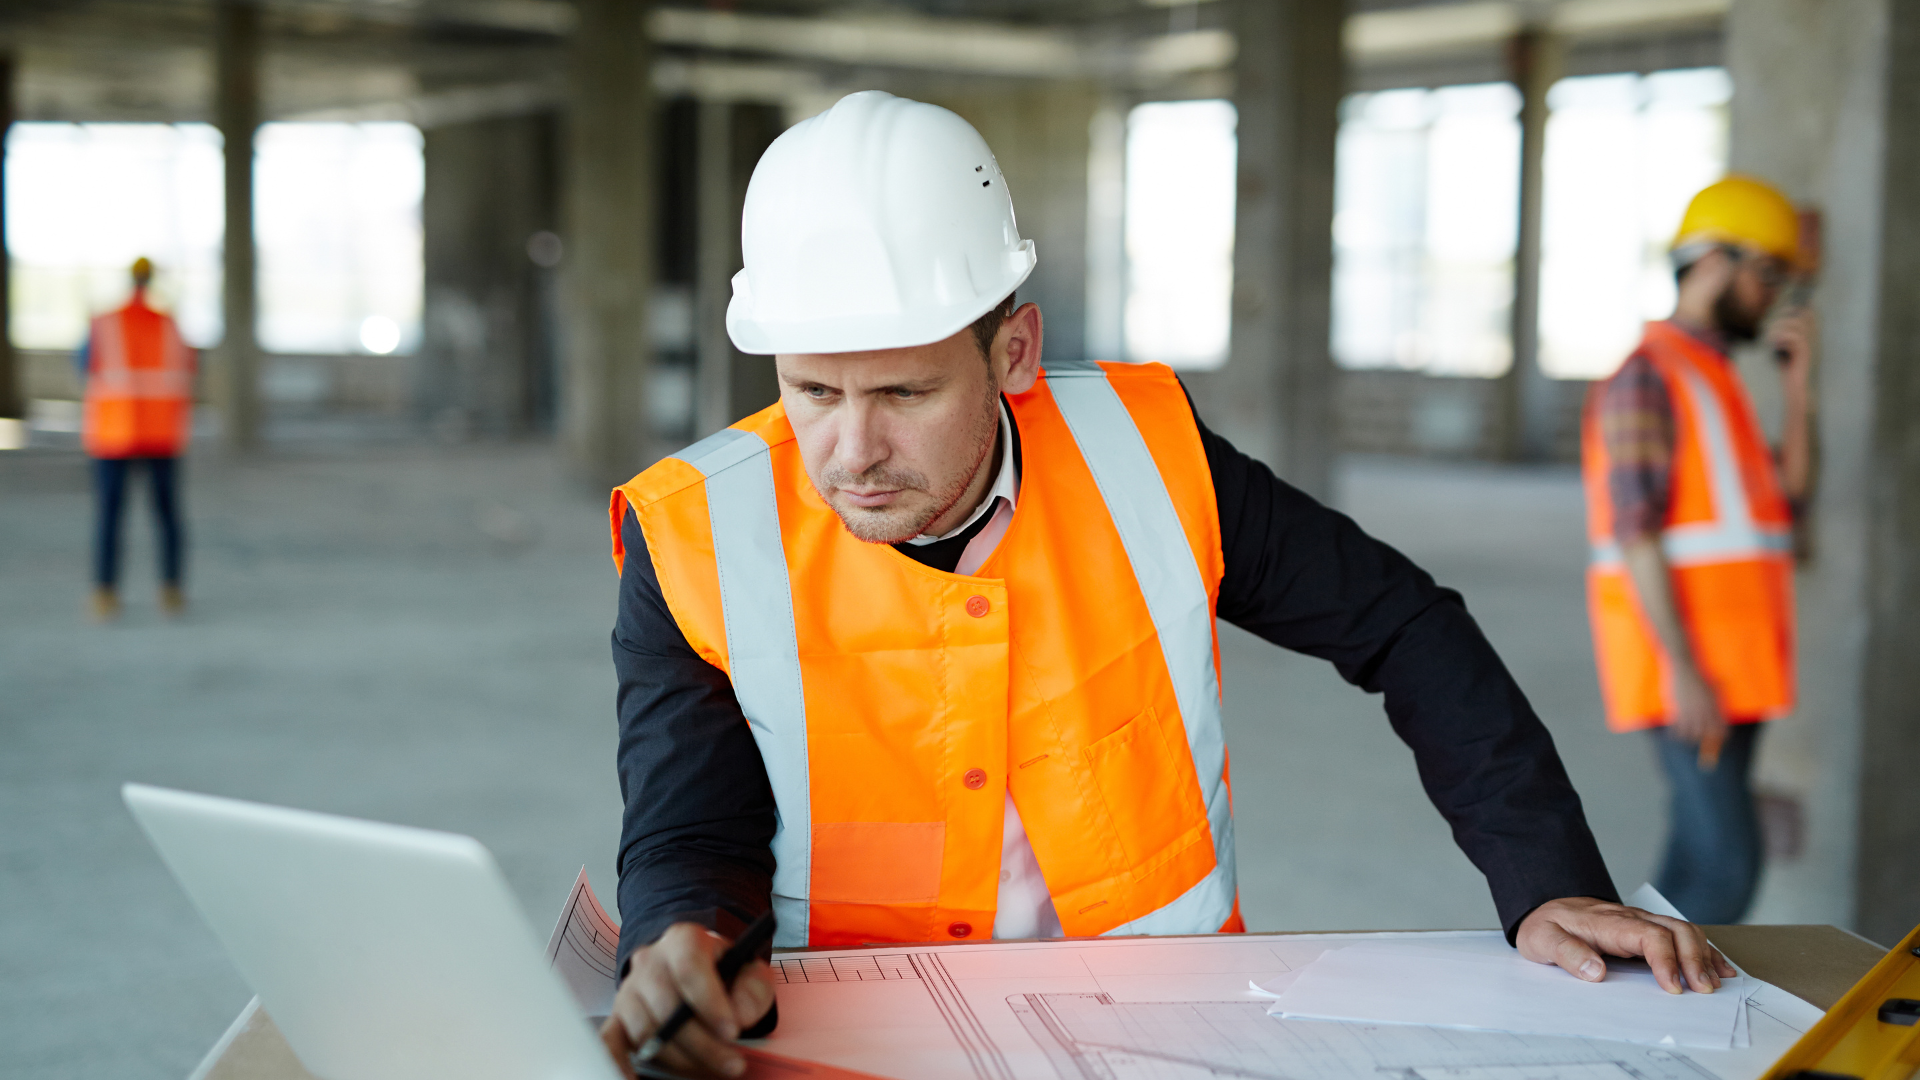 A construction worker on site, looking at CRM on laptop